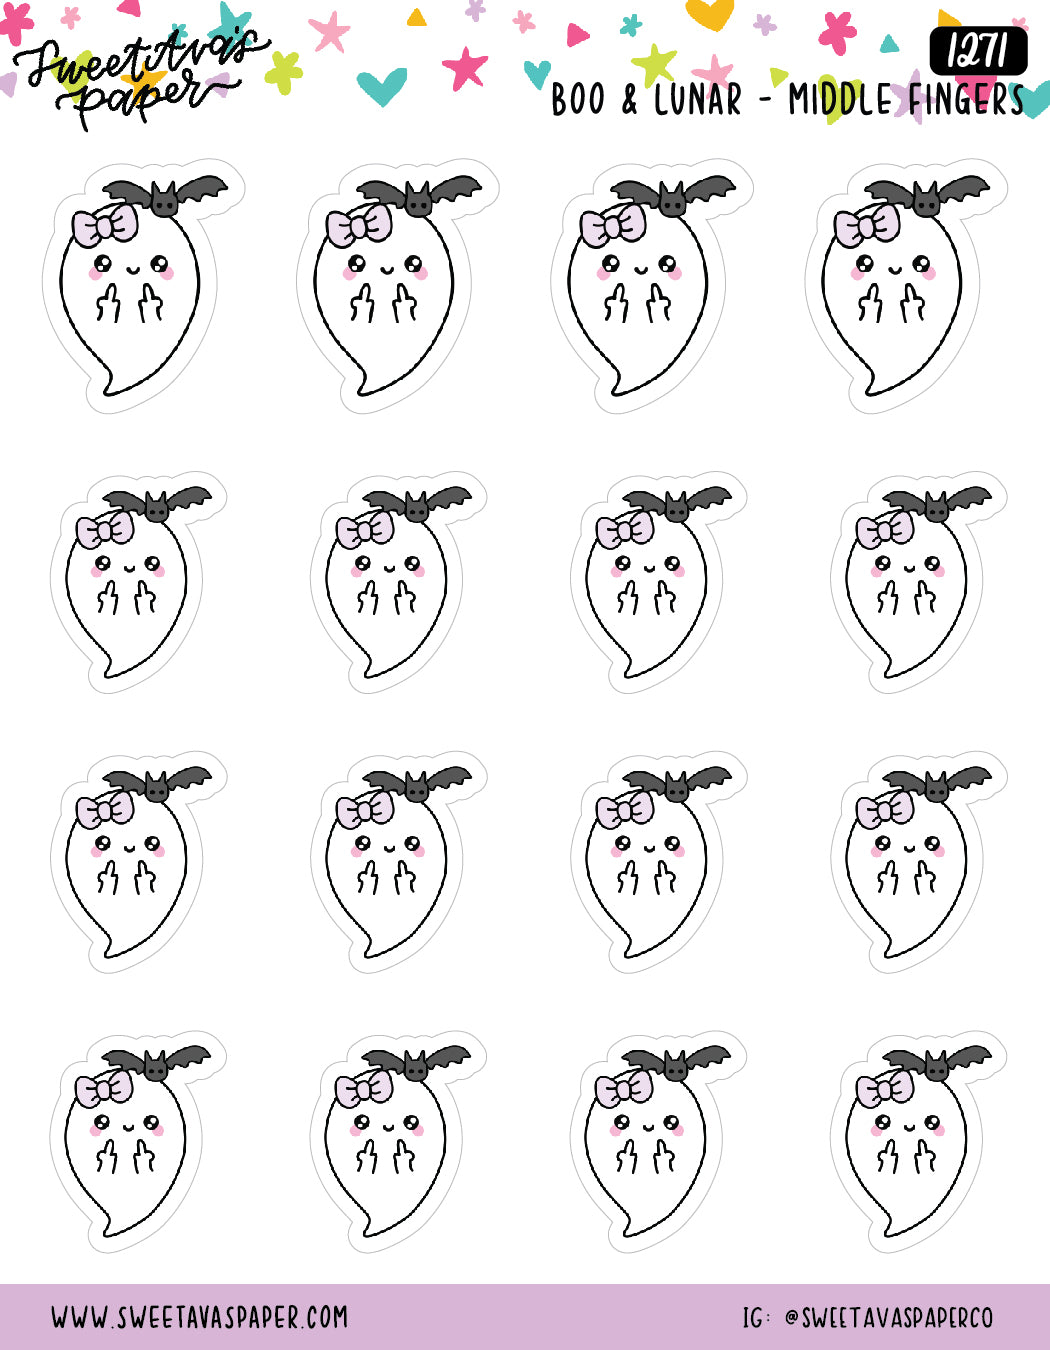 Middle Finger Planner Stickers - Boo and Lunar [1271]